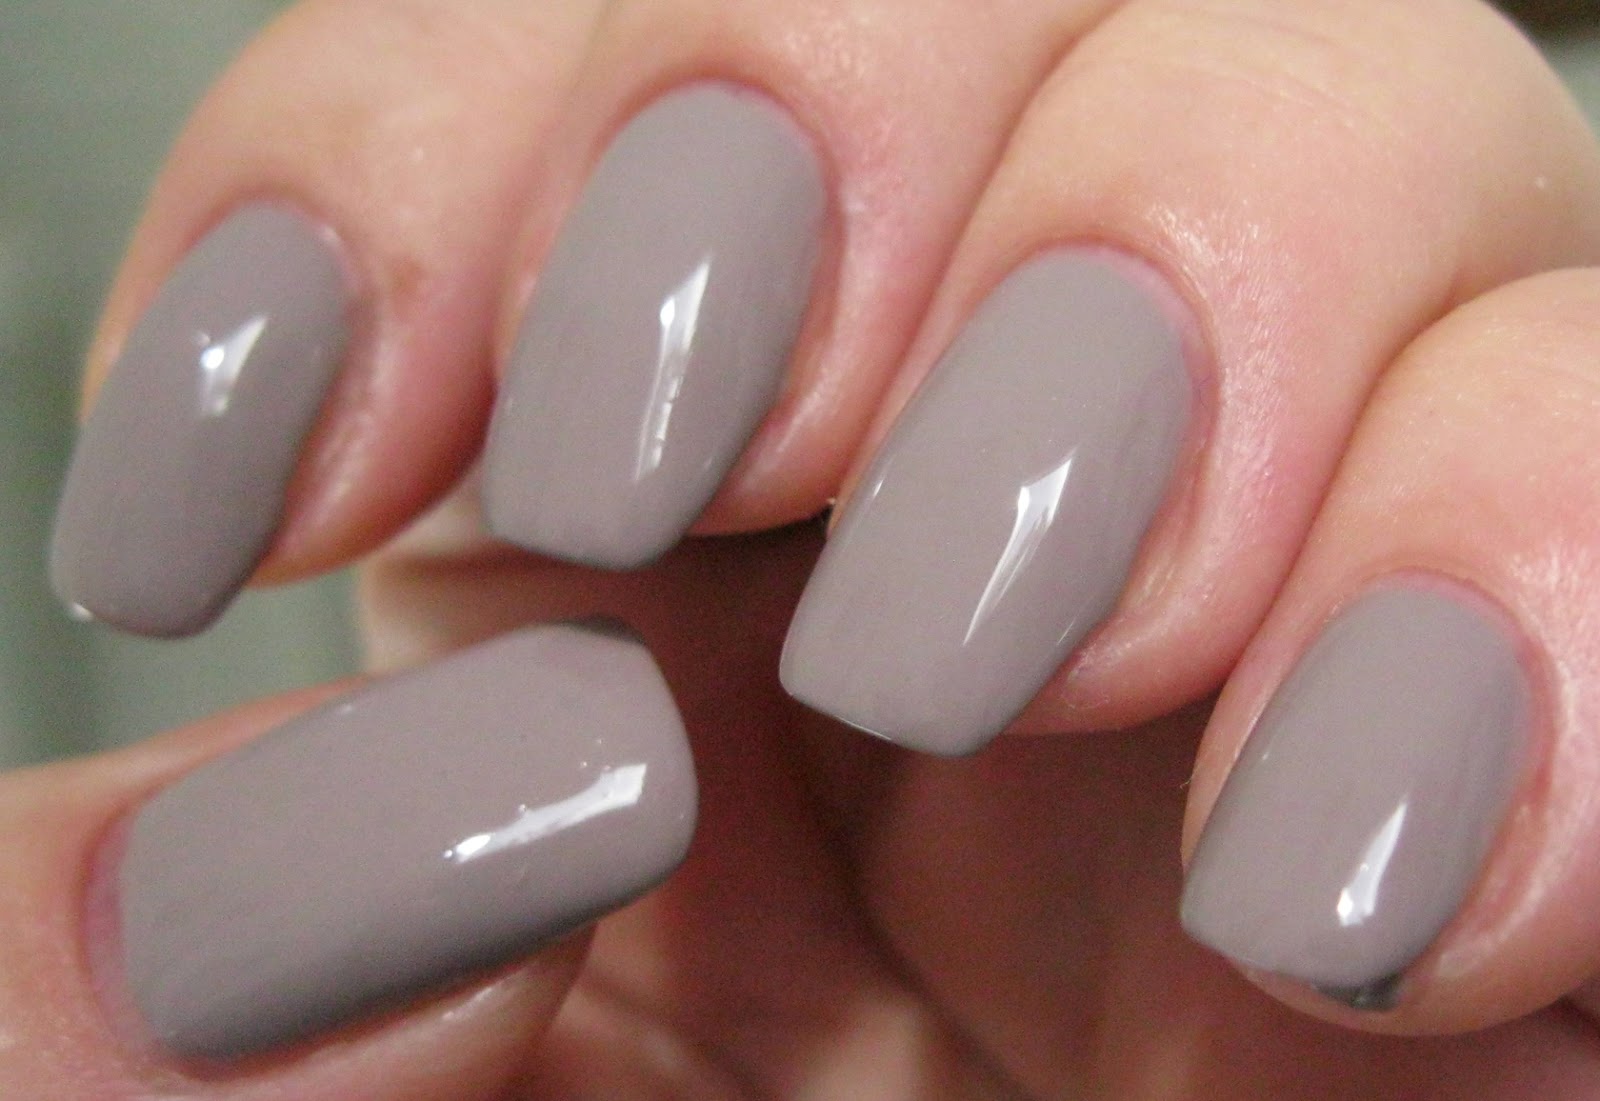 4. OPI Nail Lacquer in "Taupe-less Beach" - wide 4